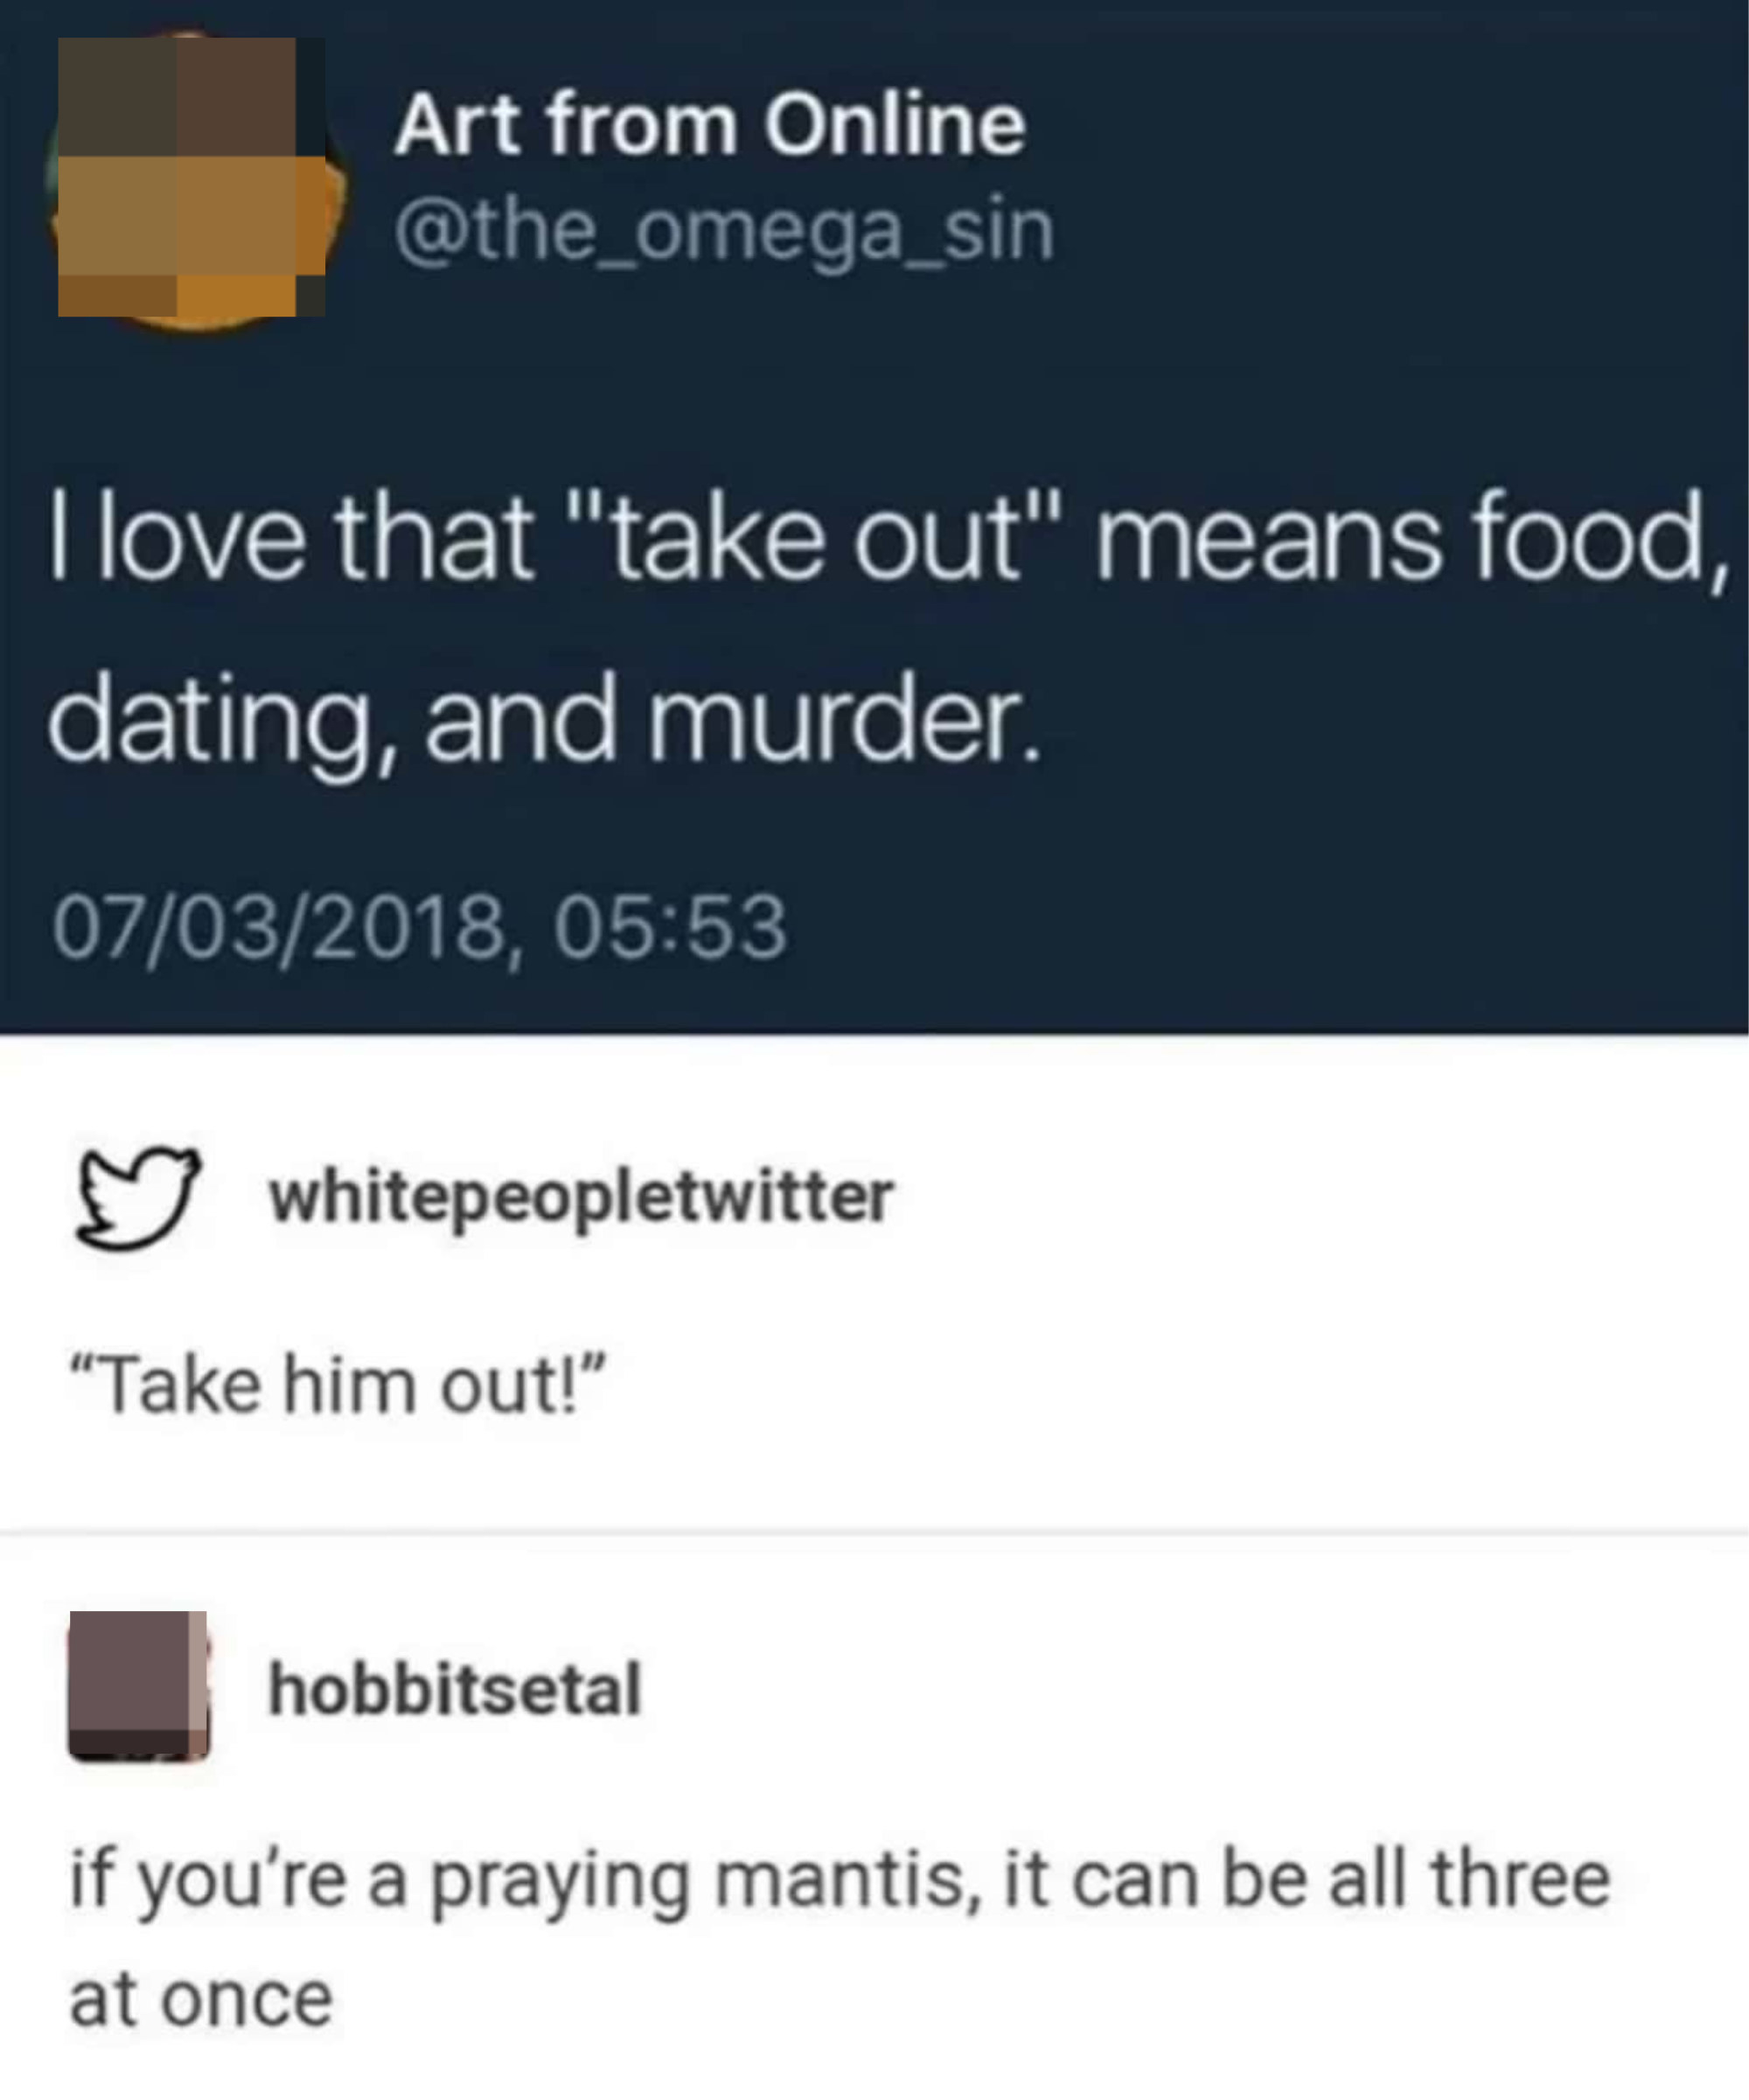 Someone points out that &quot;take out&quot; means food, dating, and murder, and someone says a praying mantis can make all three happen